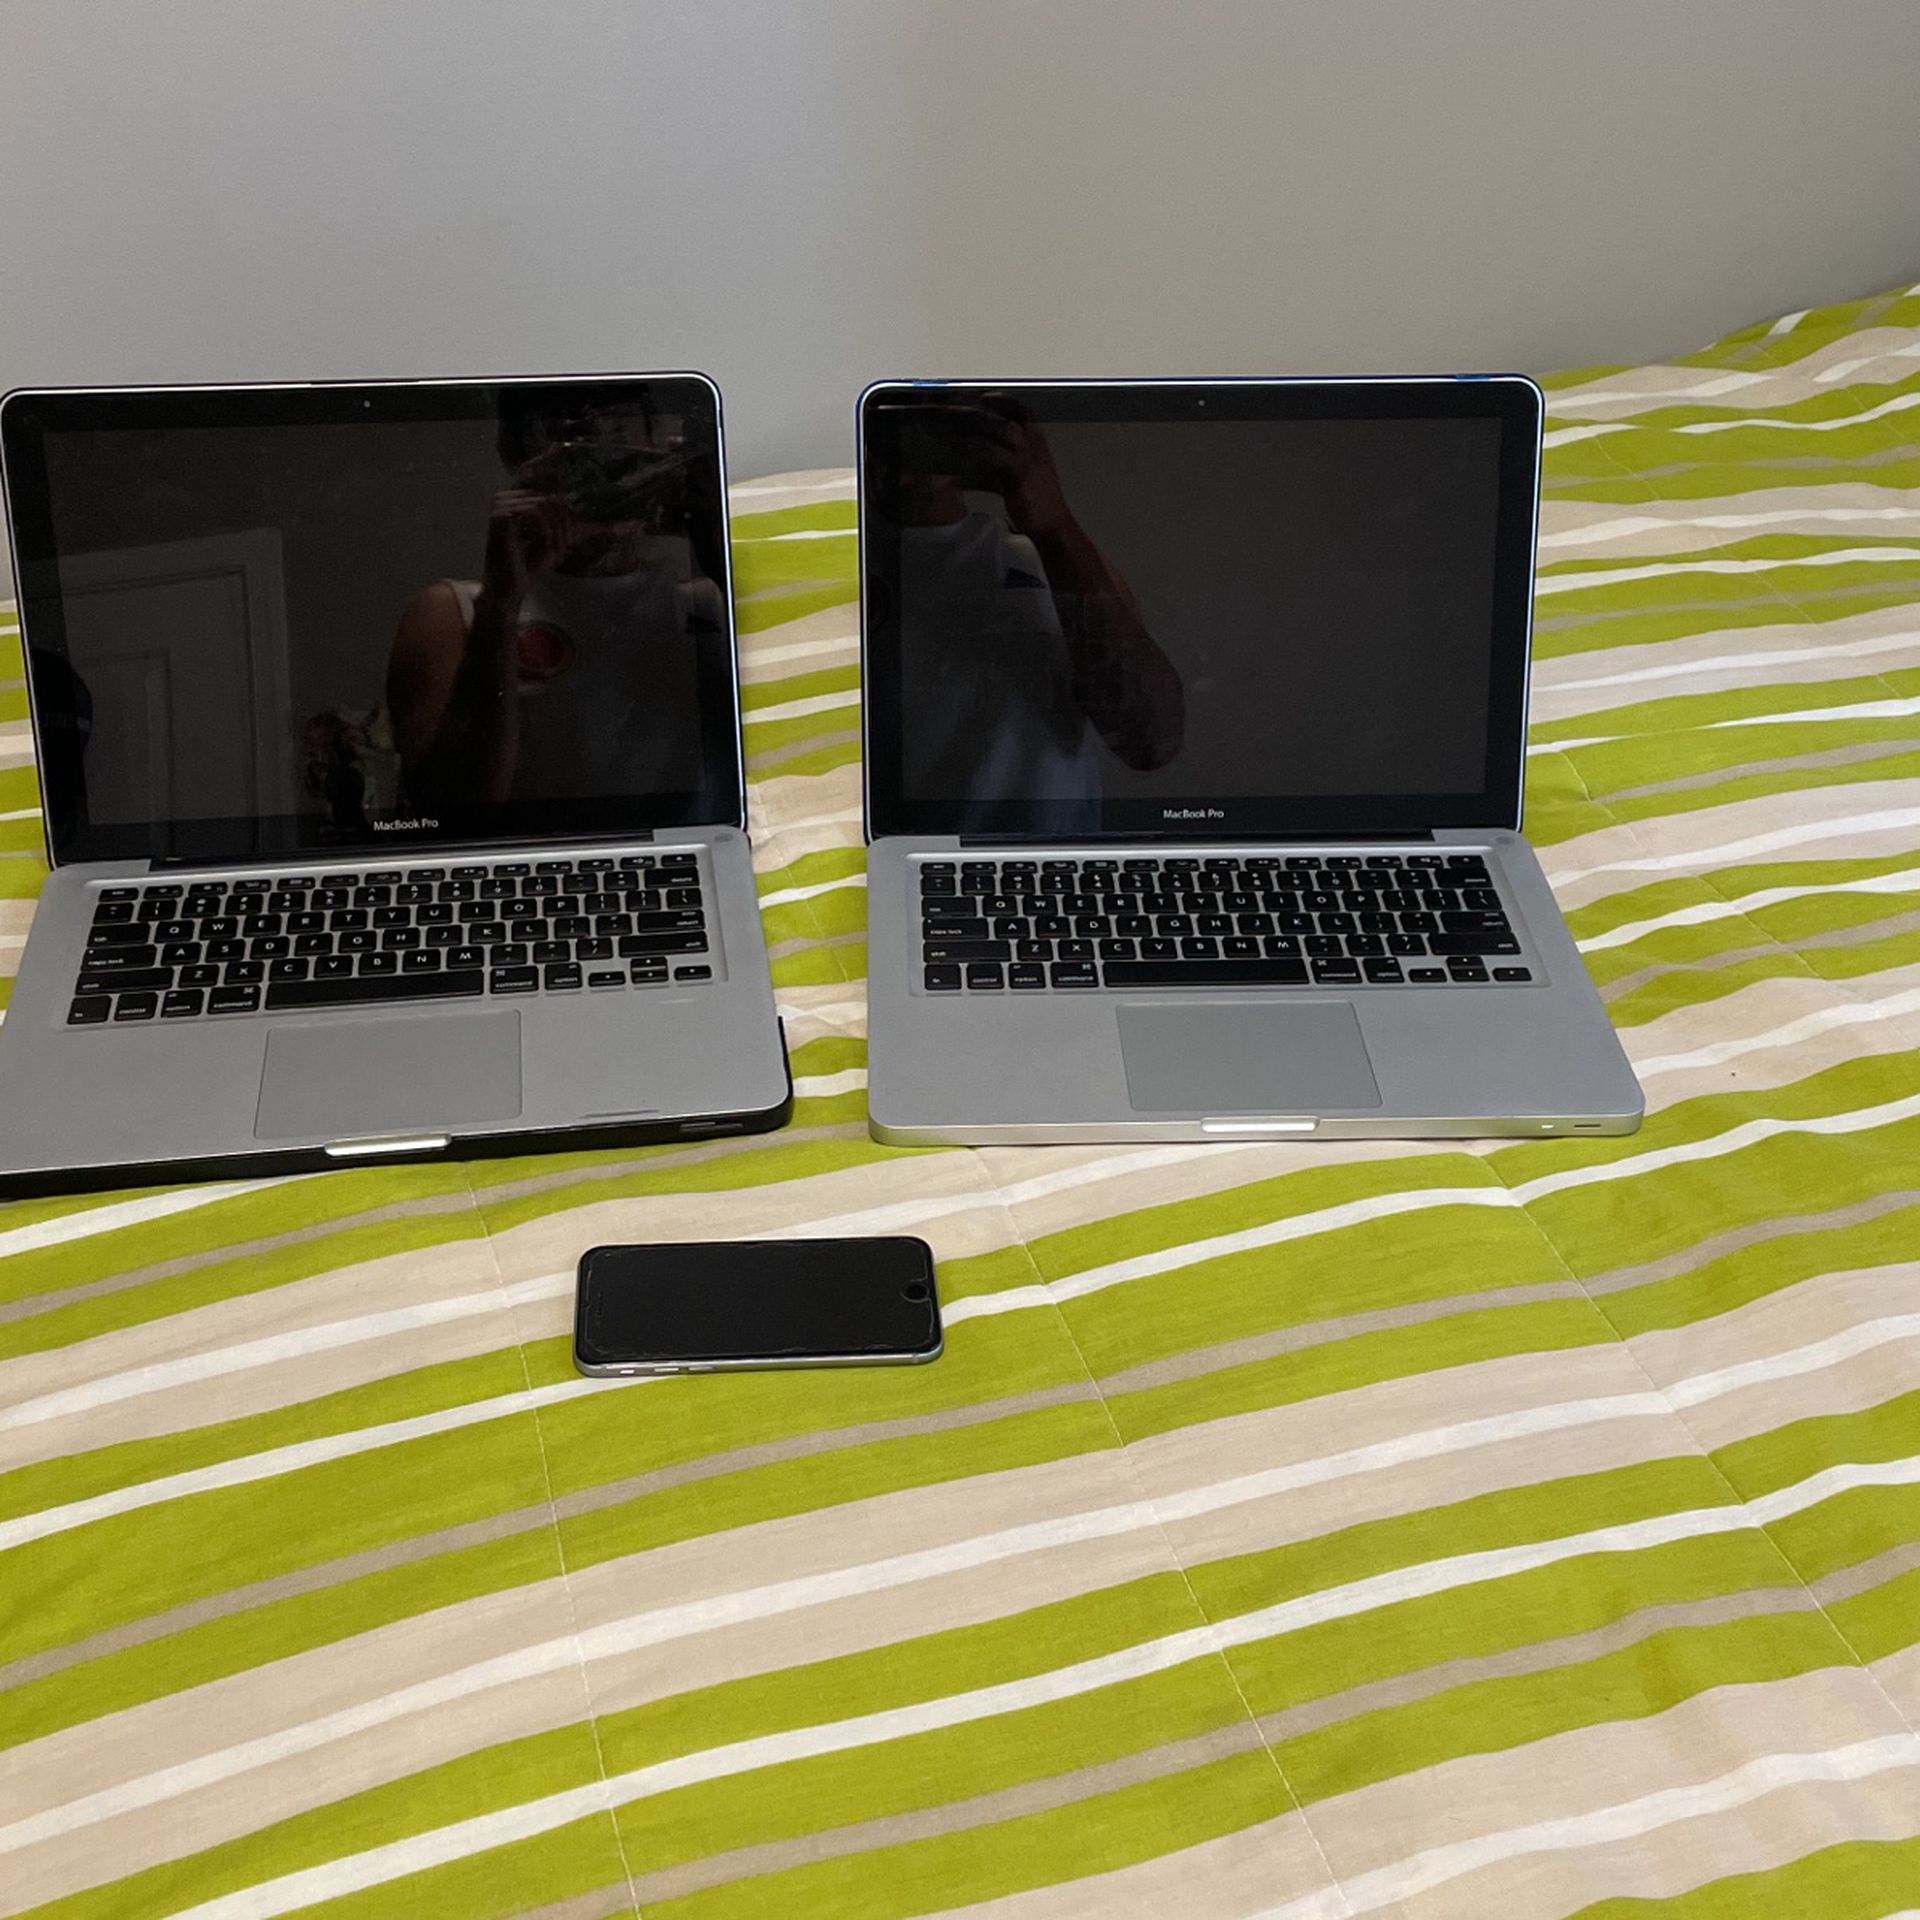 IPHONE 6S & Two Mac Book pro 15 Inch 